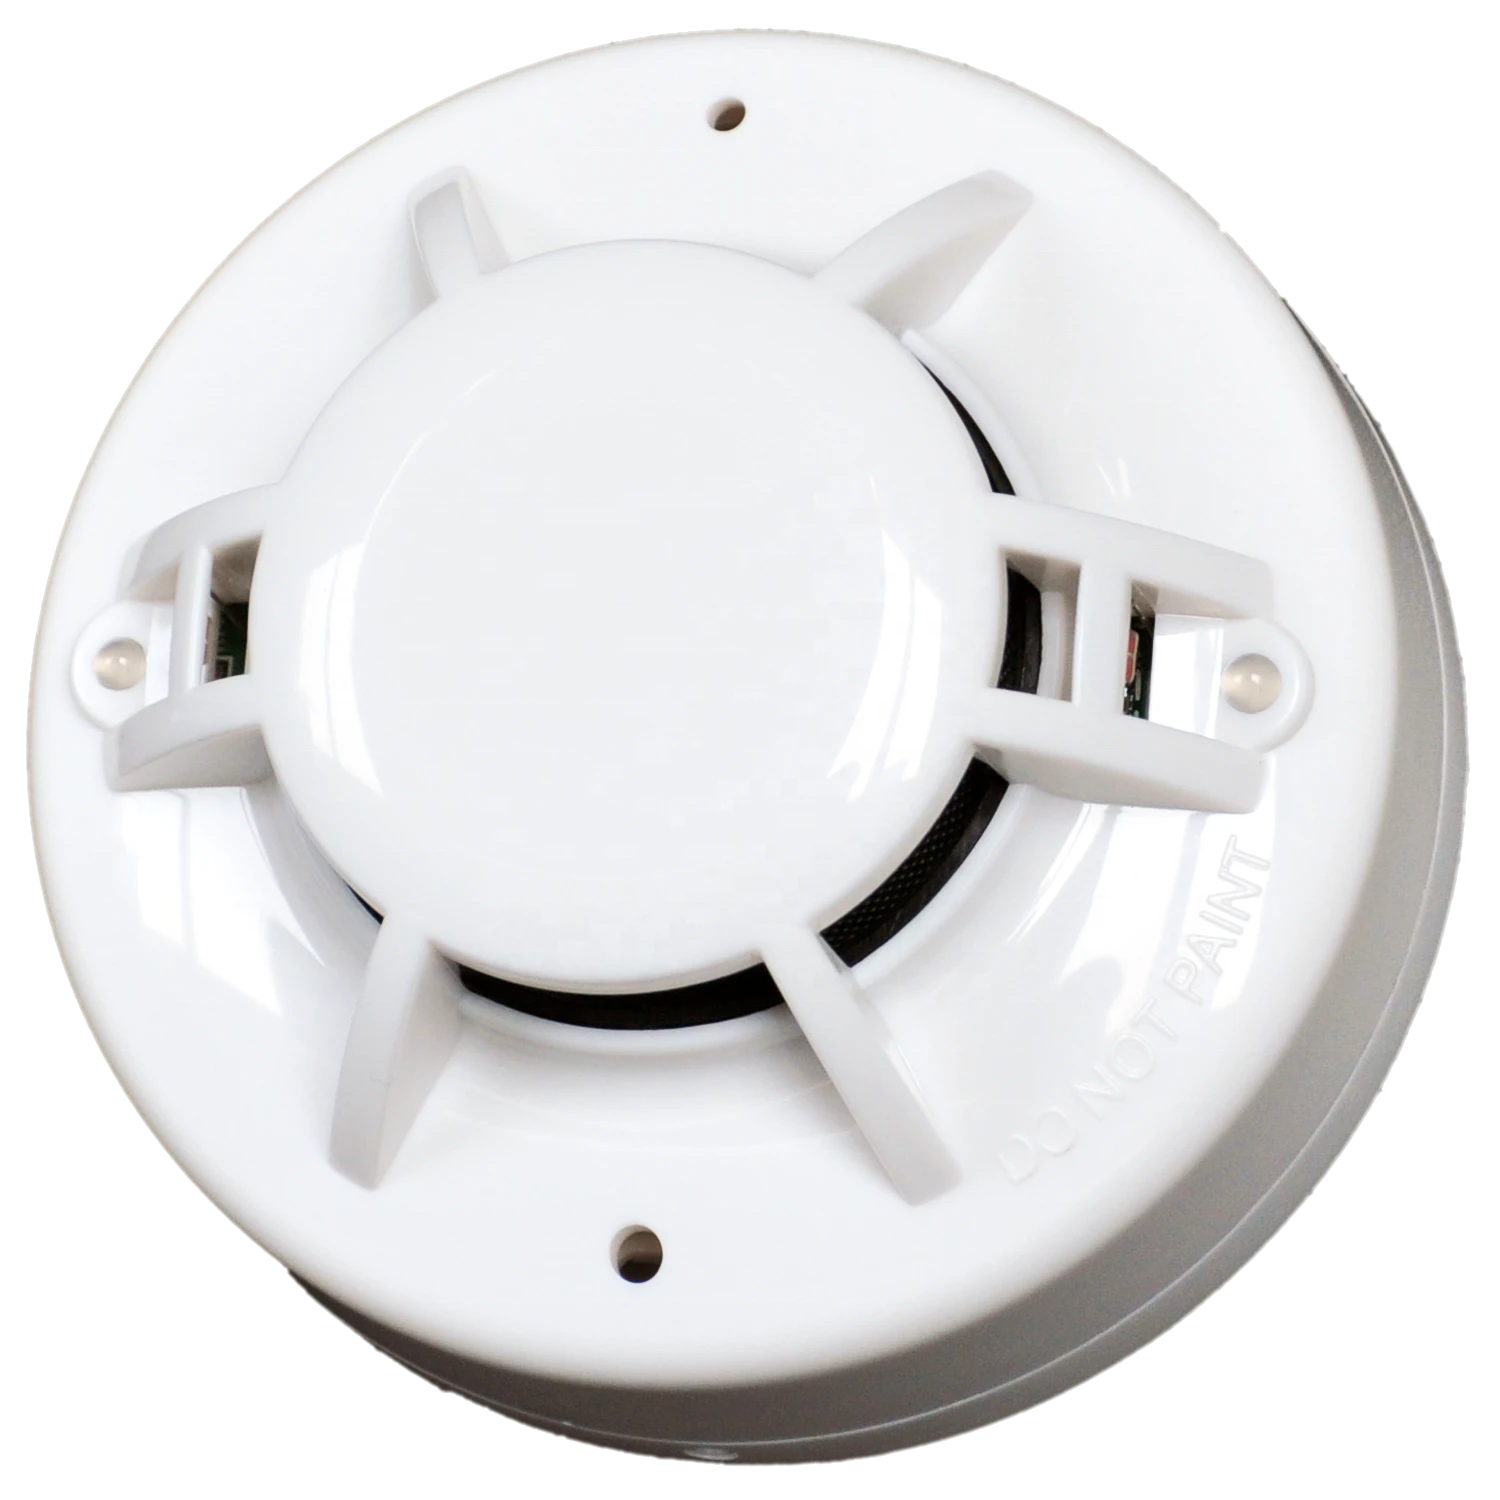 UL Approved smoke and heat detector for fire fighting control